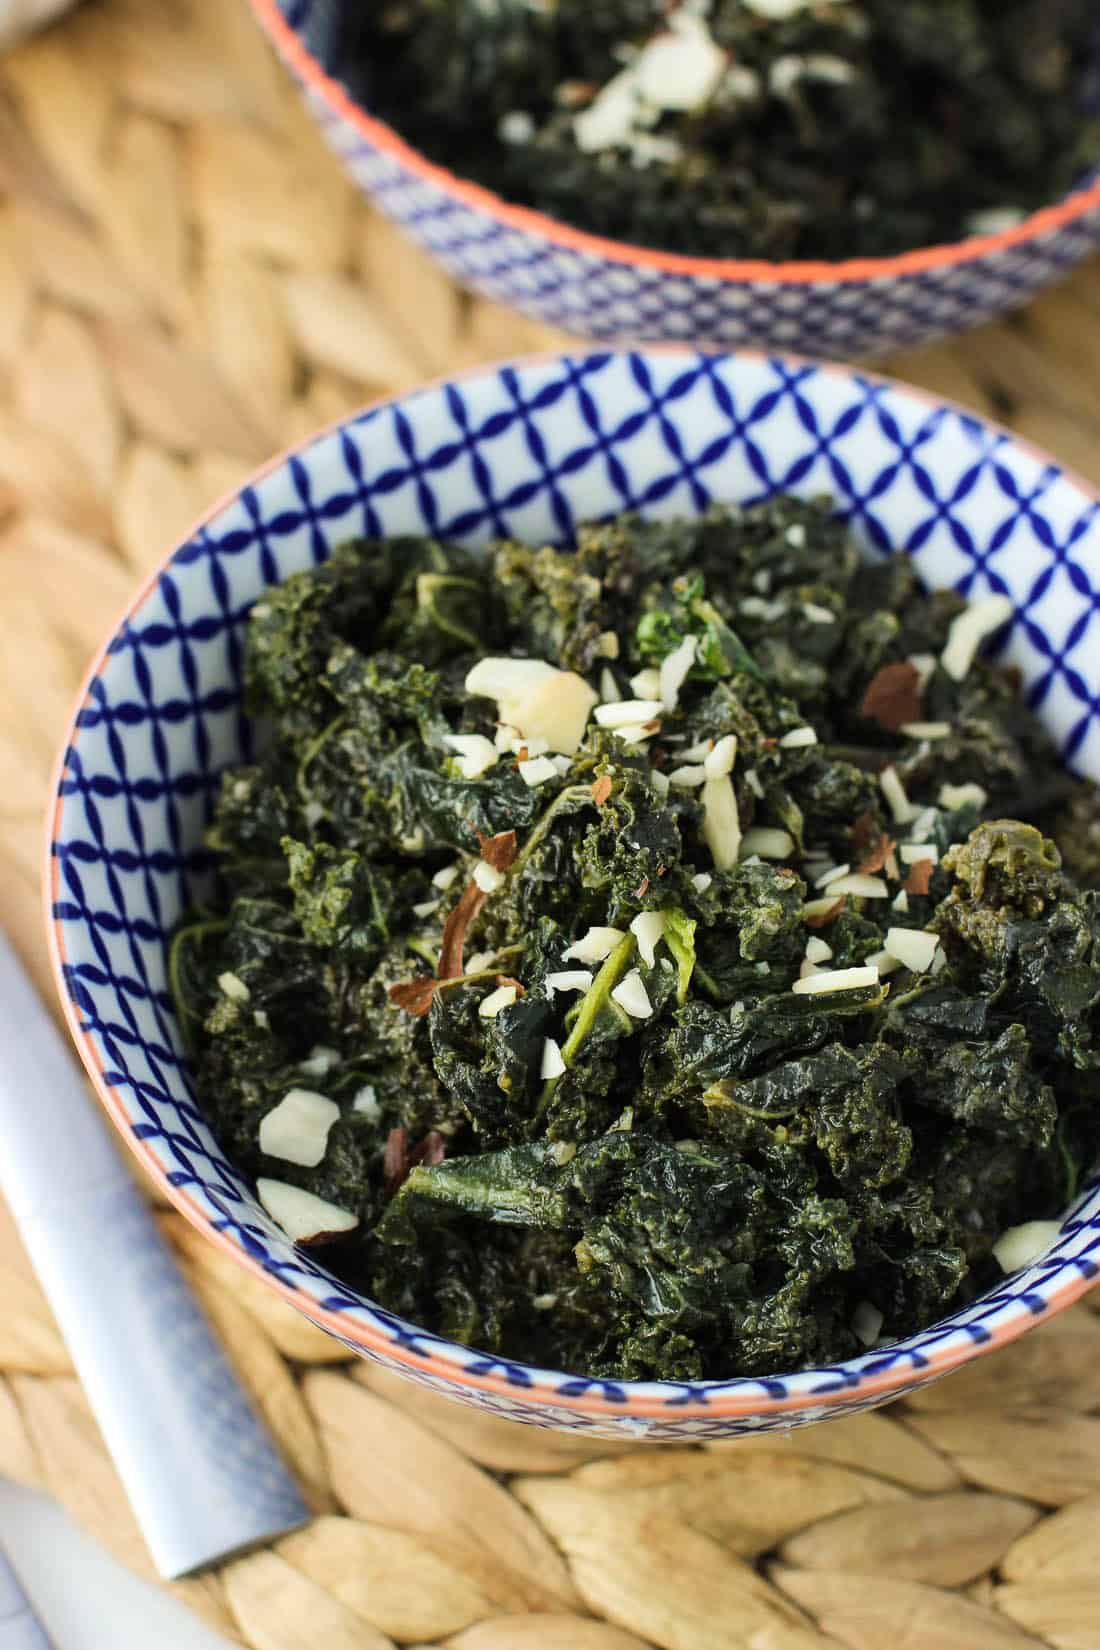 A small ceramic bowl filled with sauteed kale topped with sliced almonds, with another bowl in the background